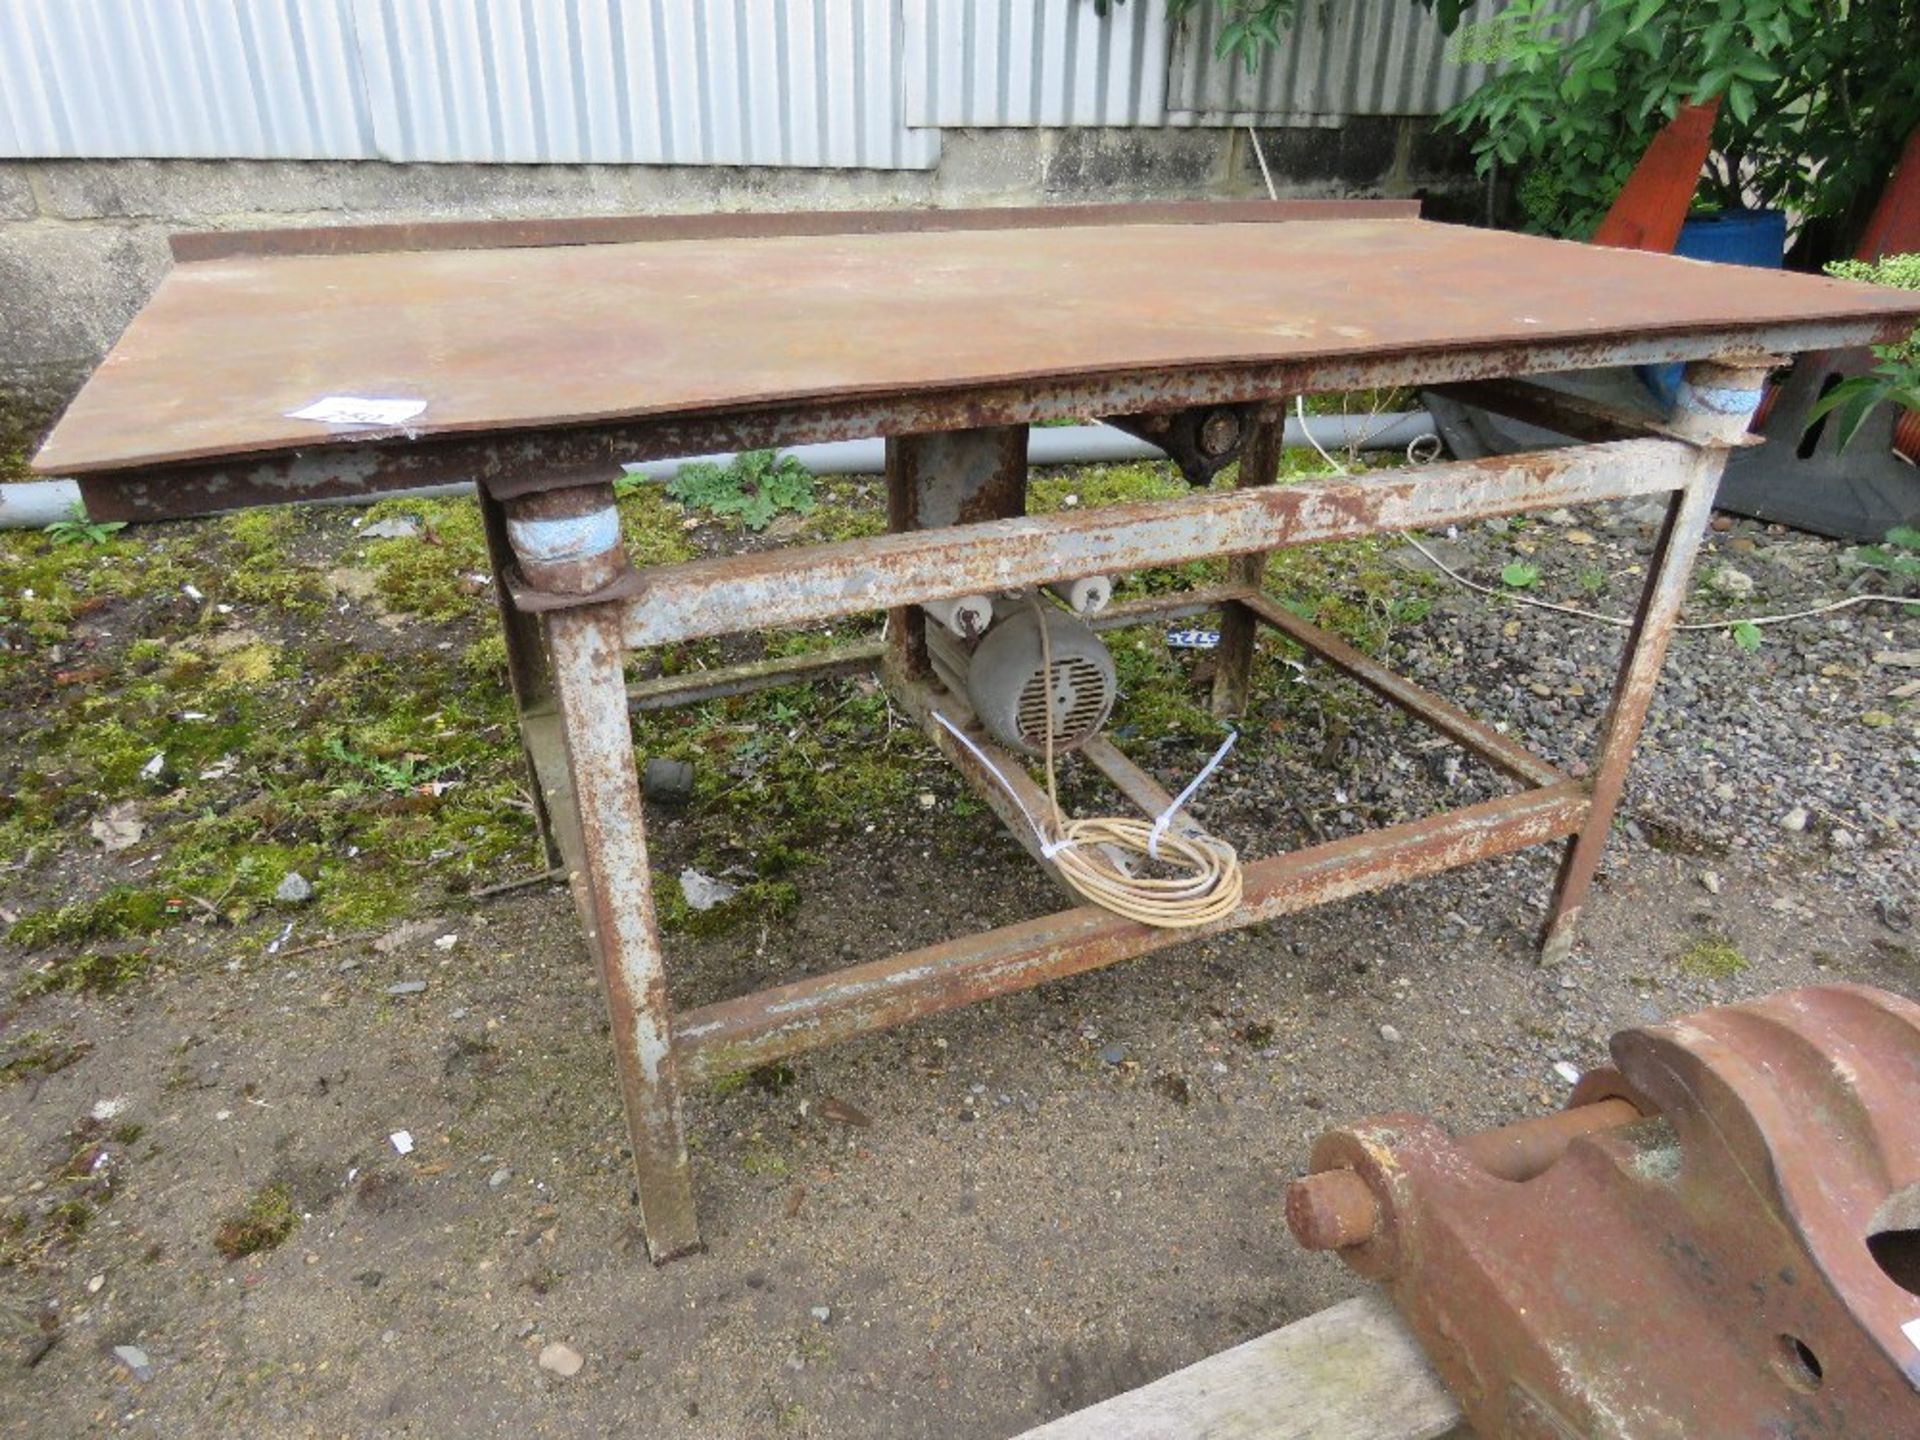 SLAB MAKING VIBRATING TABLE 240VOLT POWERED....THIS LOT IS SOLD UNDER THE AUCTIONEERS MARGIN SCHEME,